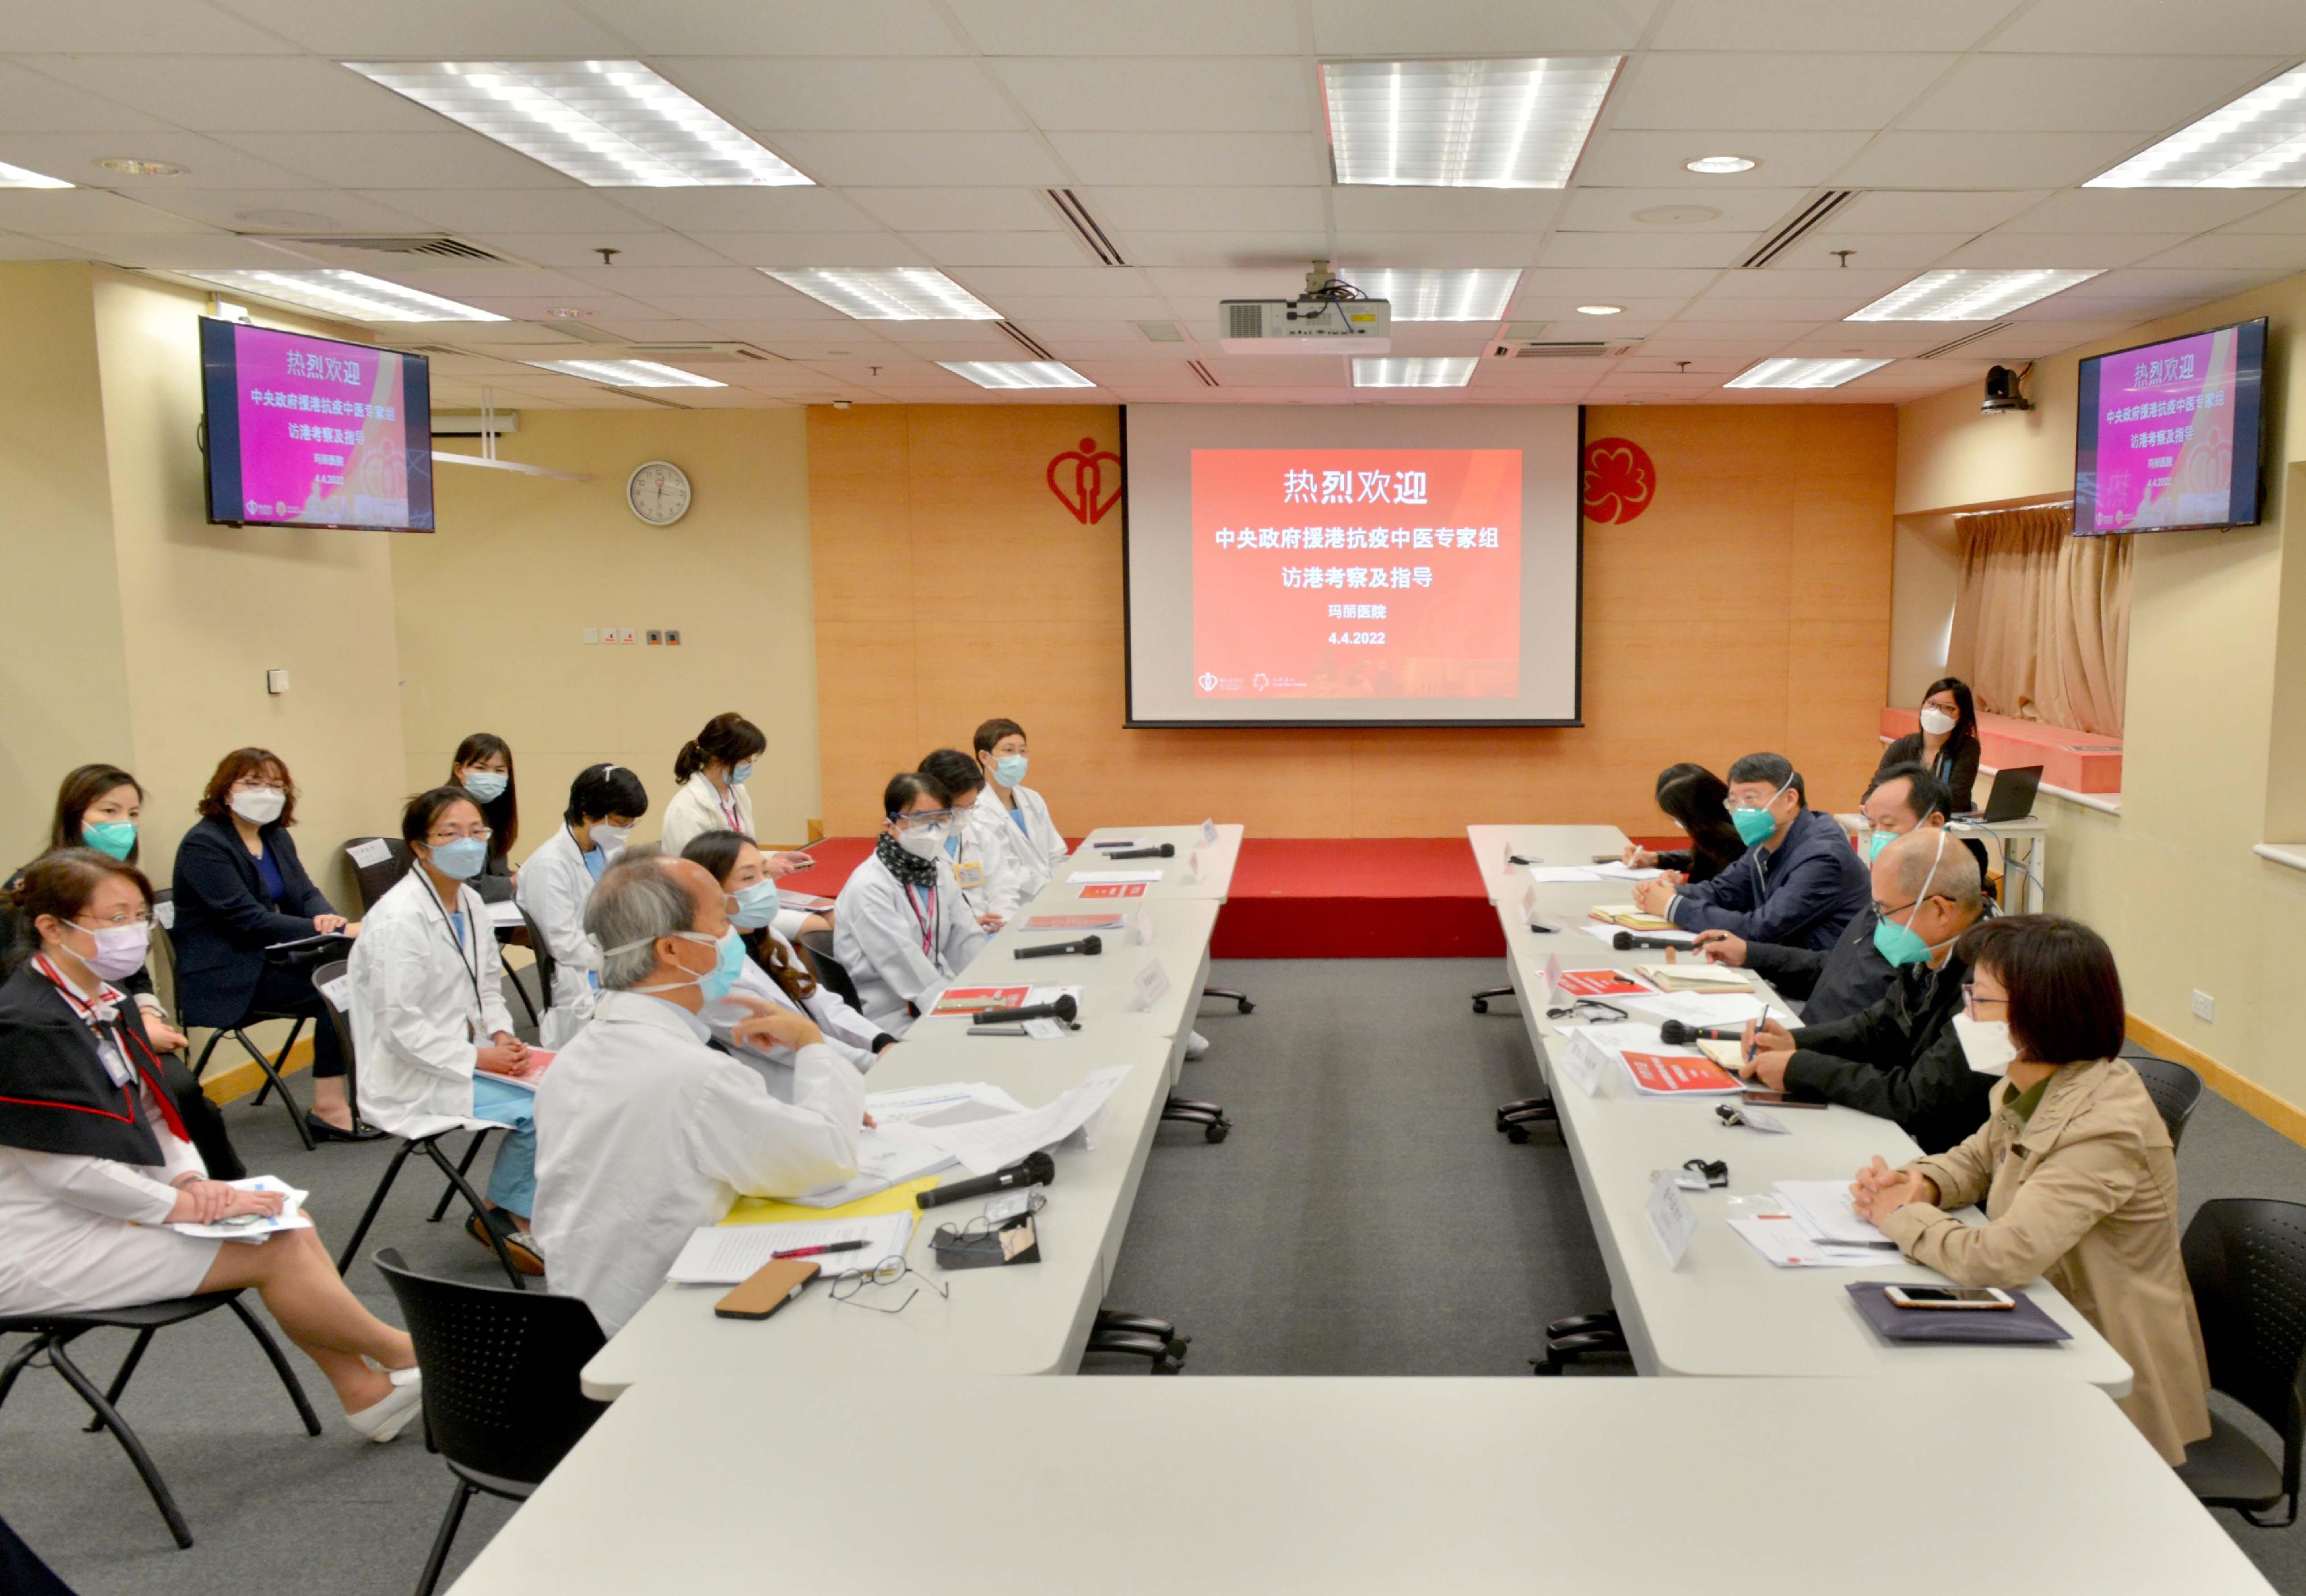 The expert group led by the leader of the Mainland Chinese medicine expert group of the Central Authorities, Mr Tong Xiaolin (third right), visited Queen Mary Hospital on April 4 sharing experience with medical team on COVID-19 patient management in particular to discuss the critical paediatrics cases.

